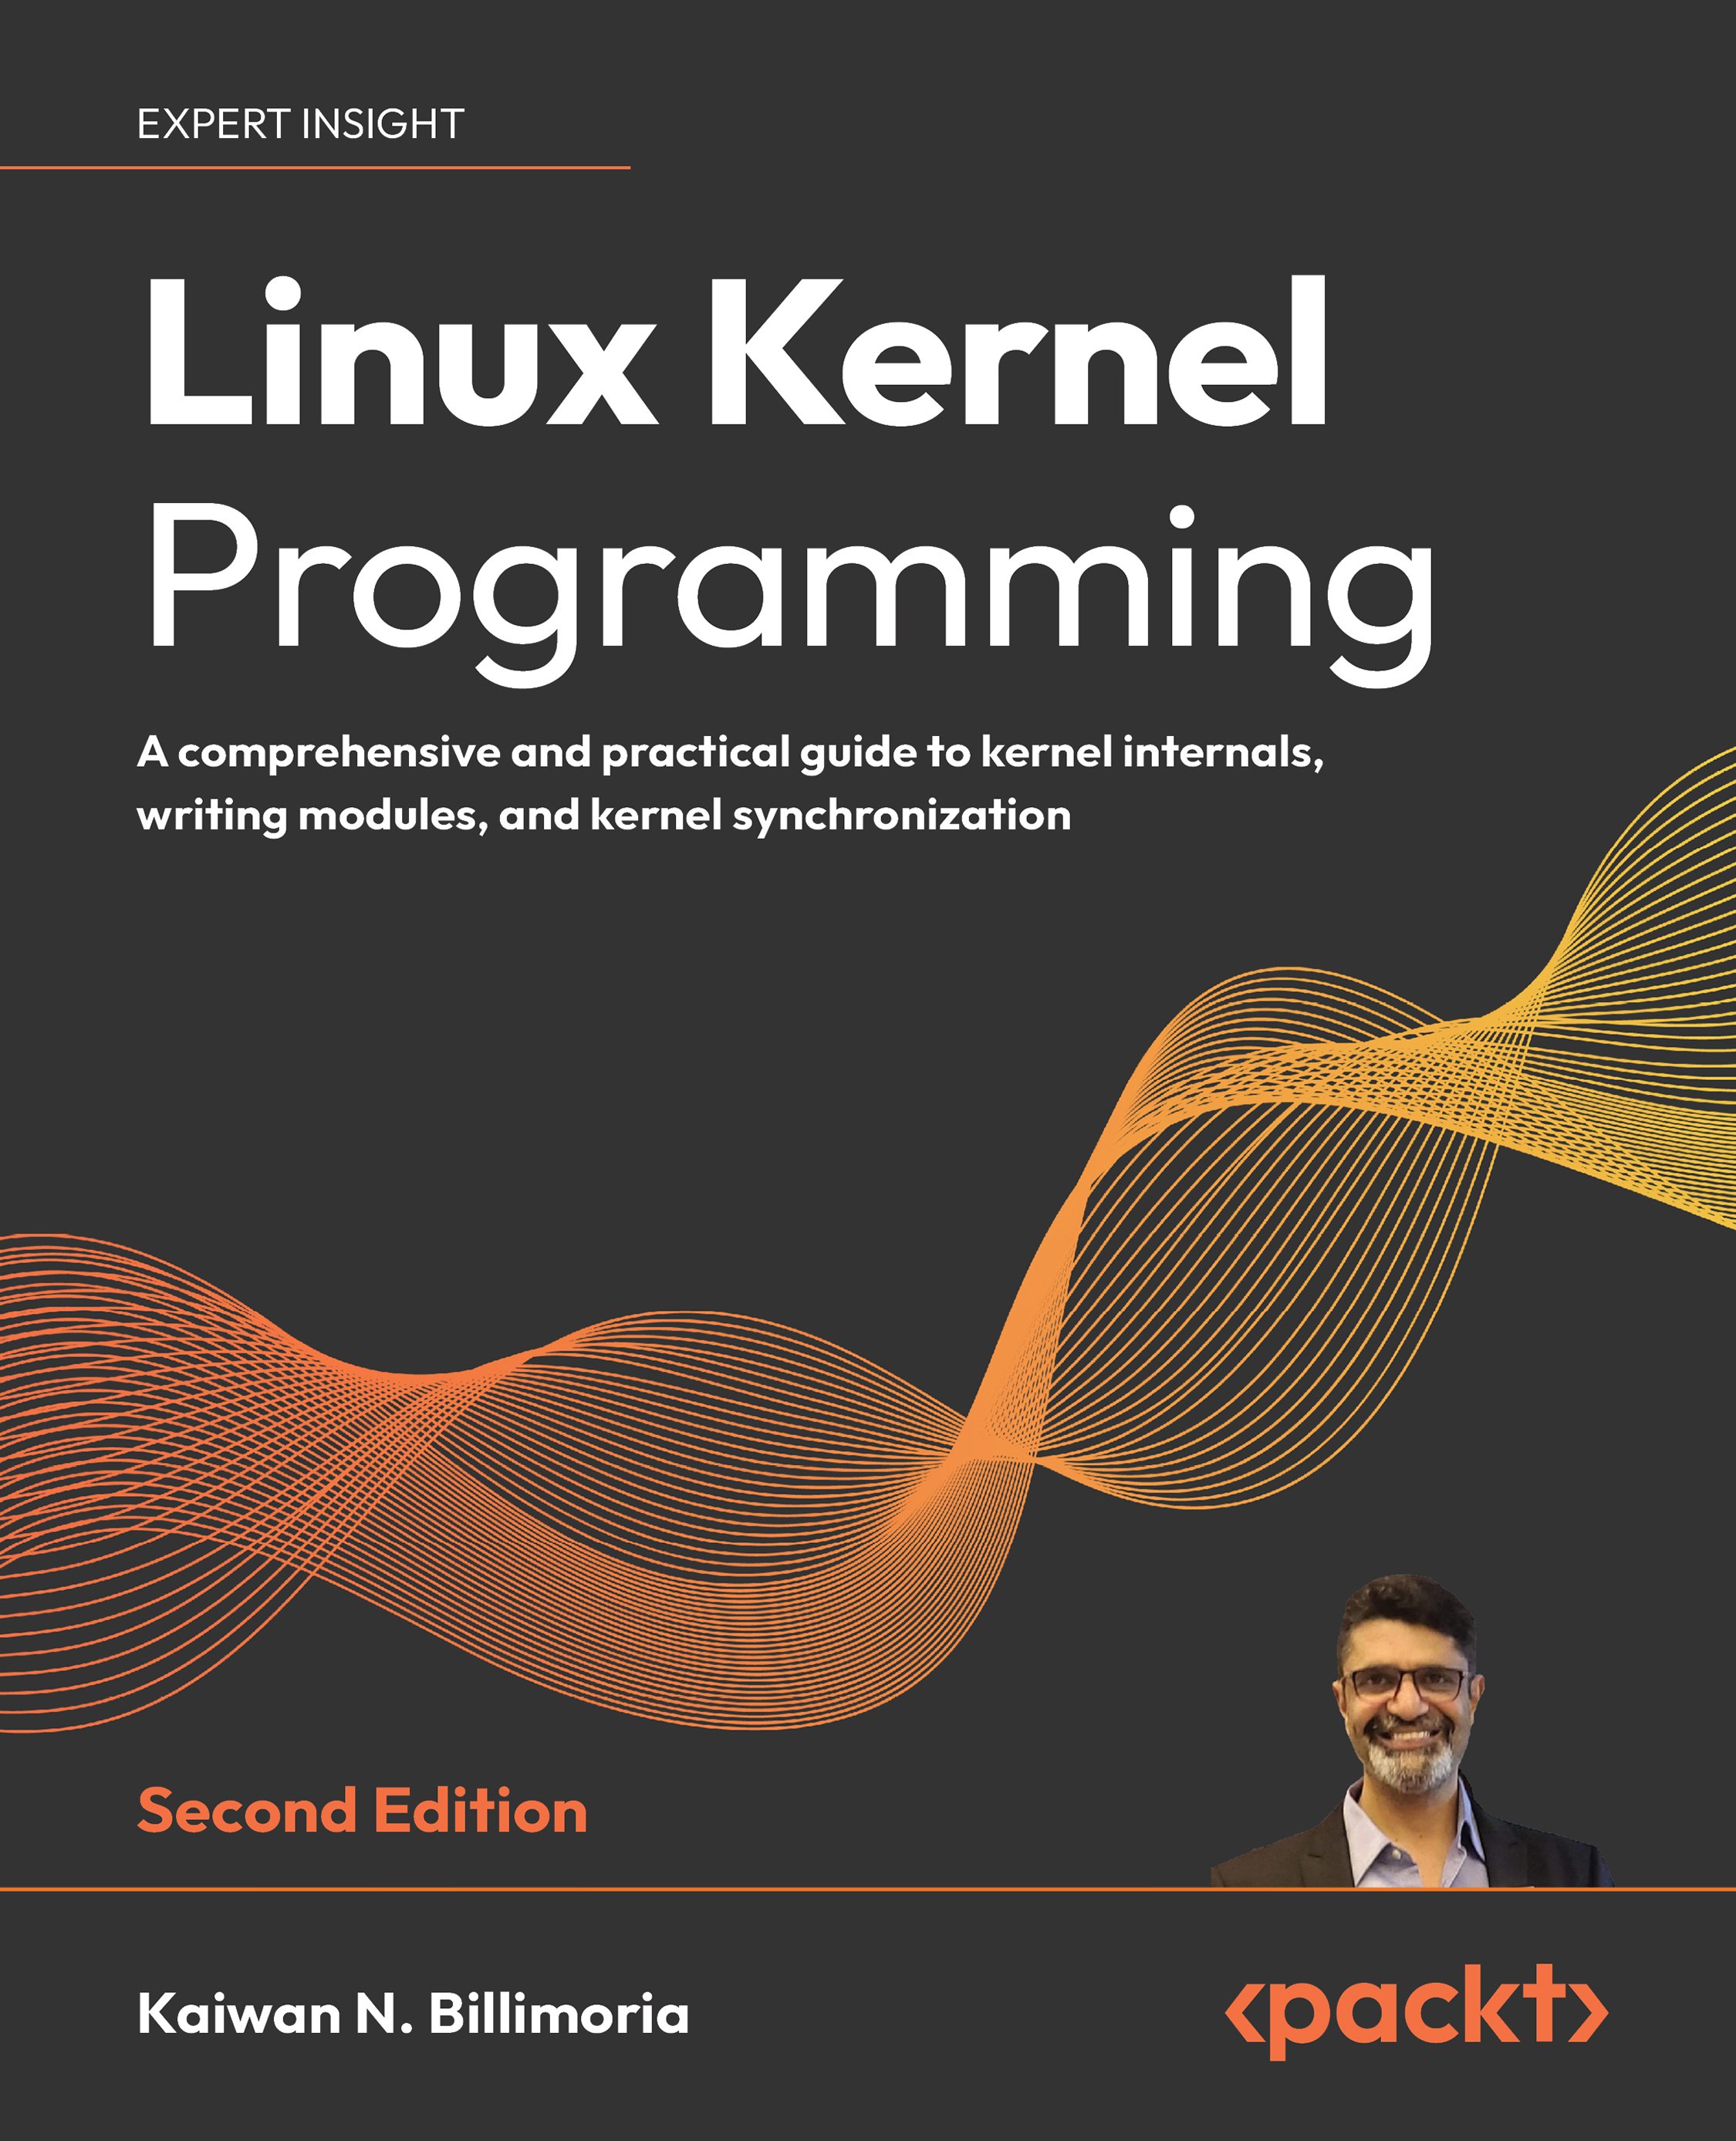 Linux Kernel Programming: A comprehensive and practical guide to kernel internals, writing modules, and kernel synchronization, Second Edition